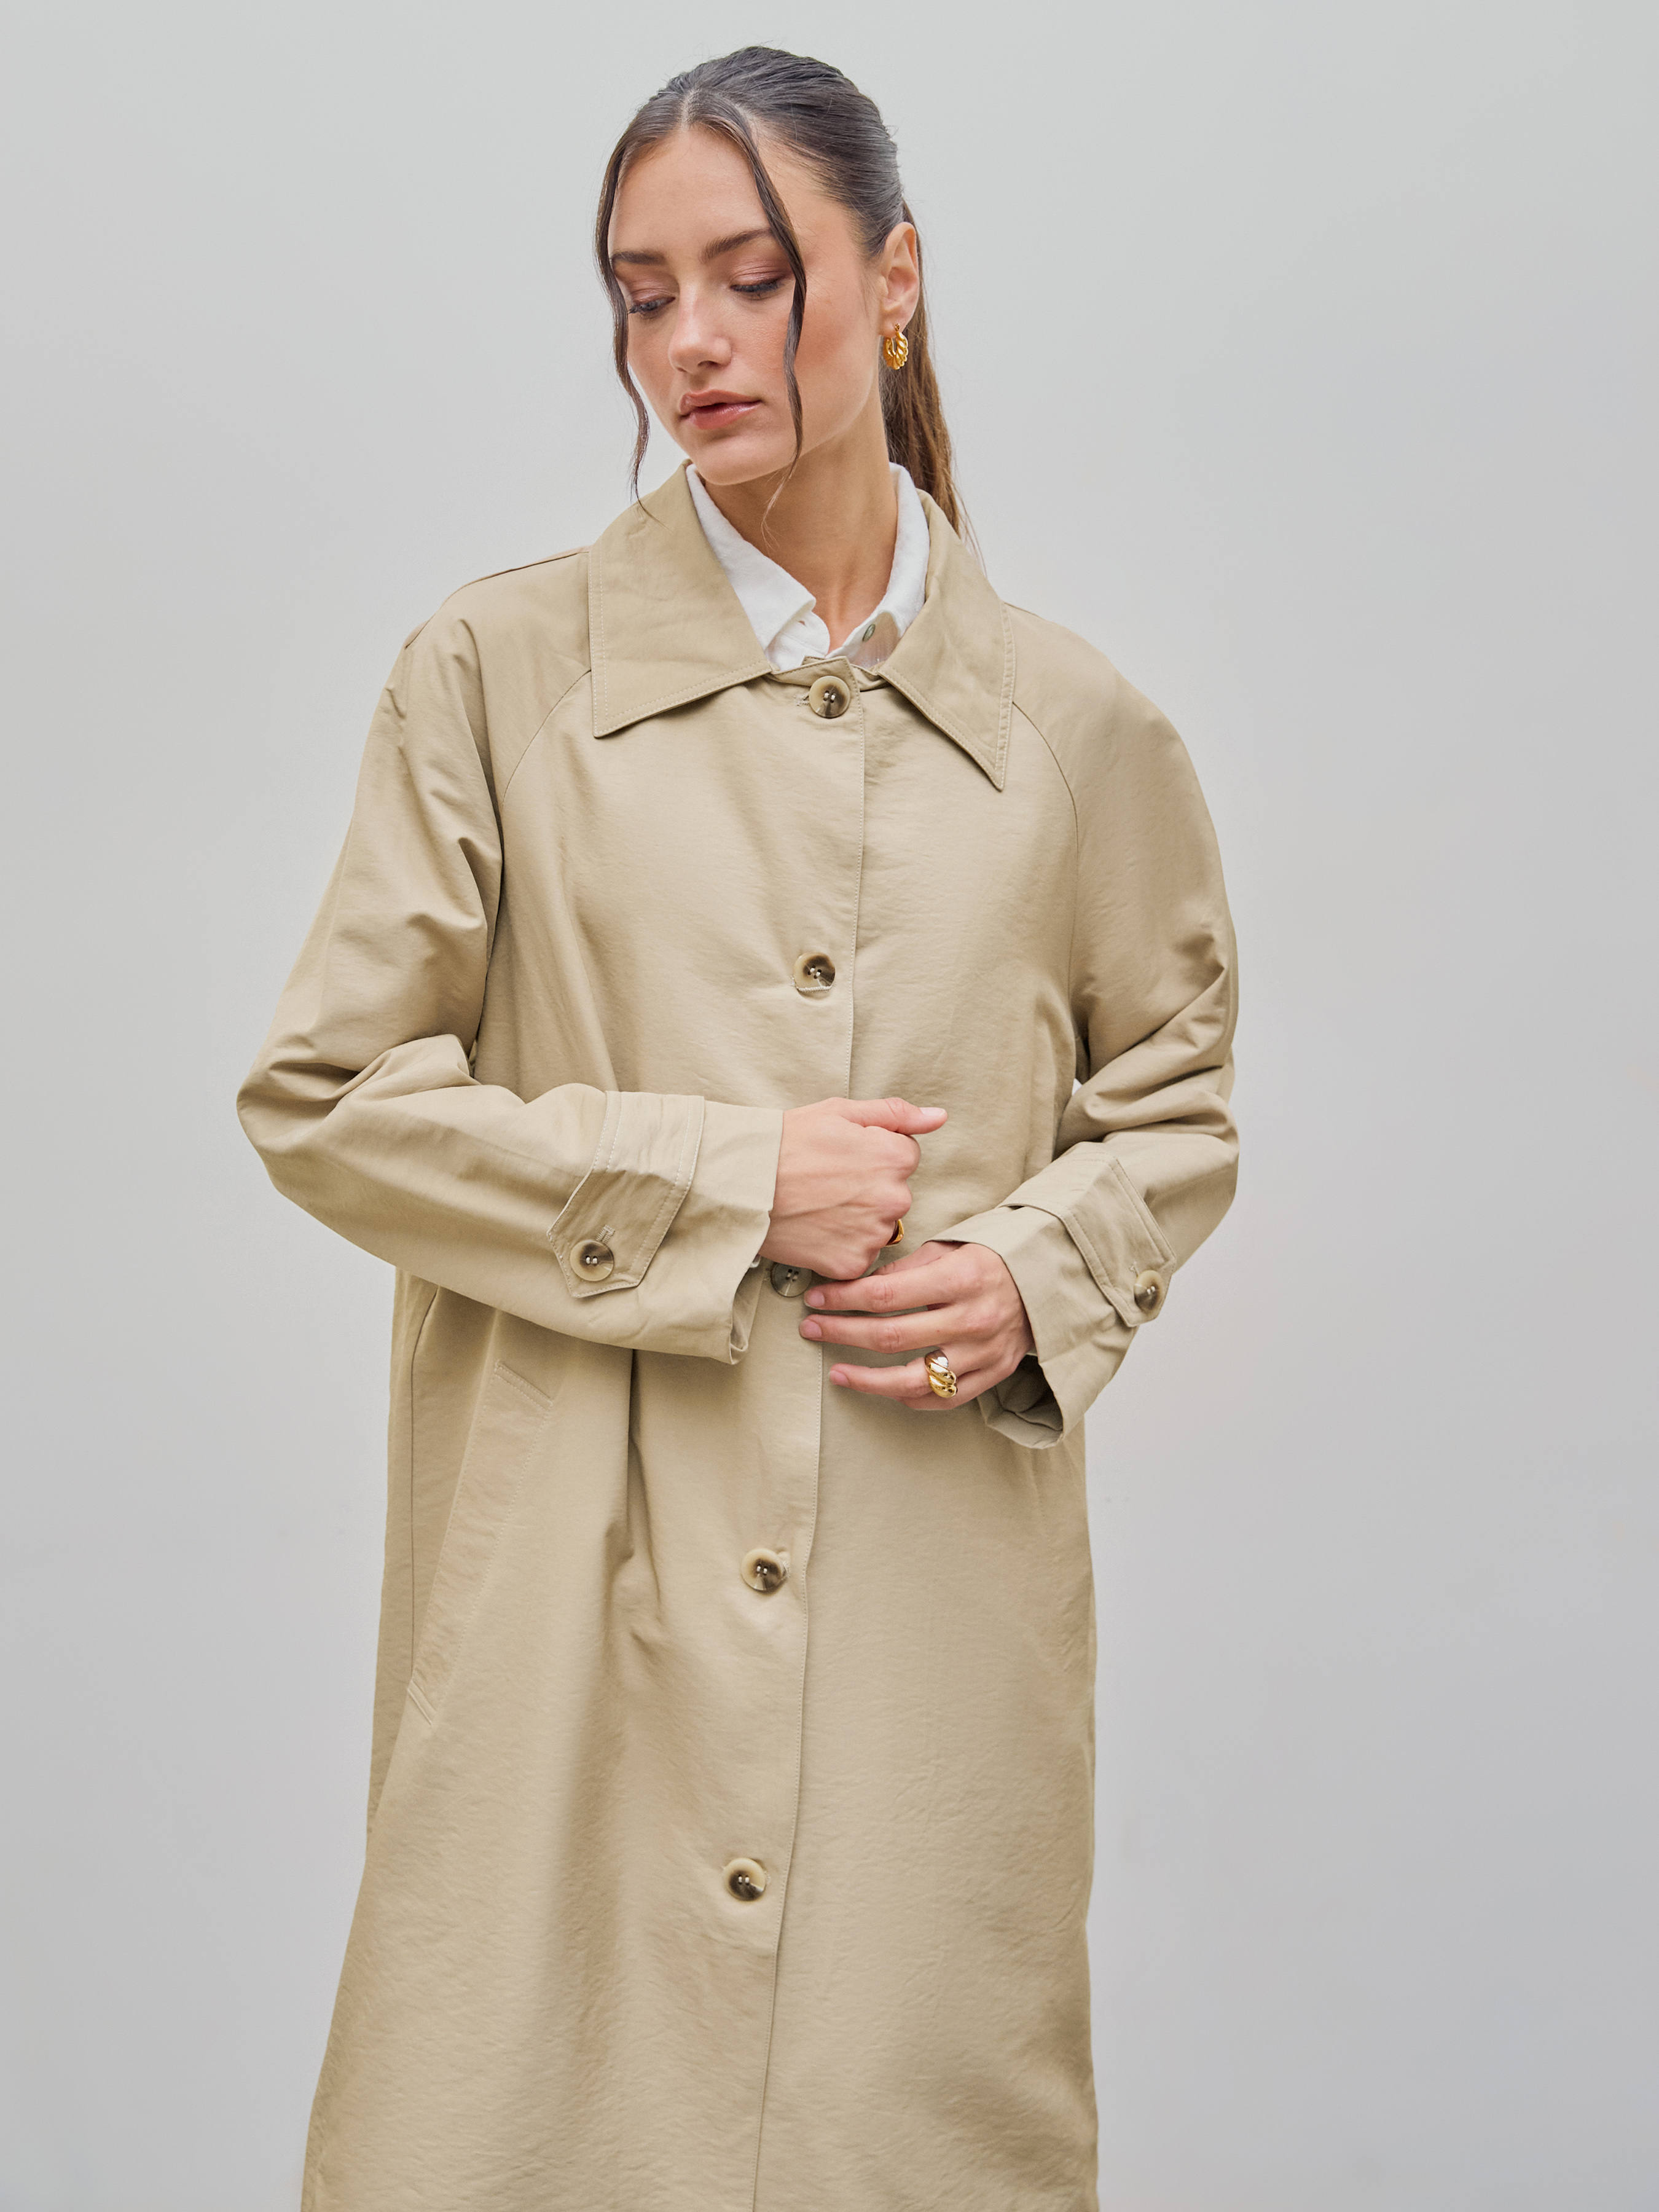 Solid Collar Button Trench Coat For School Daily Casual